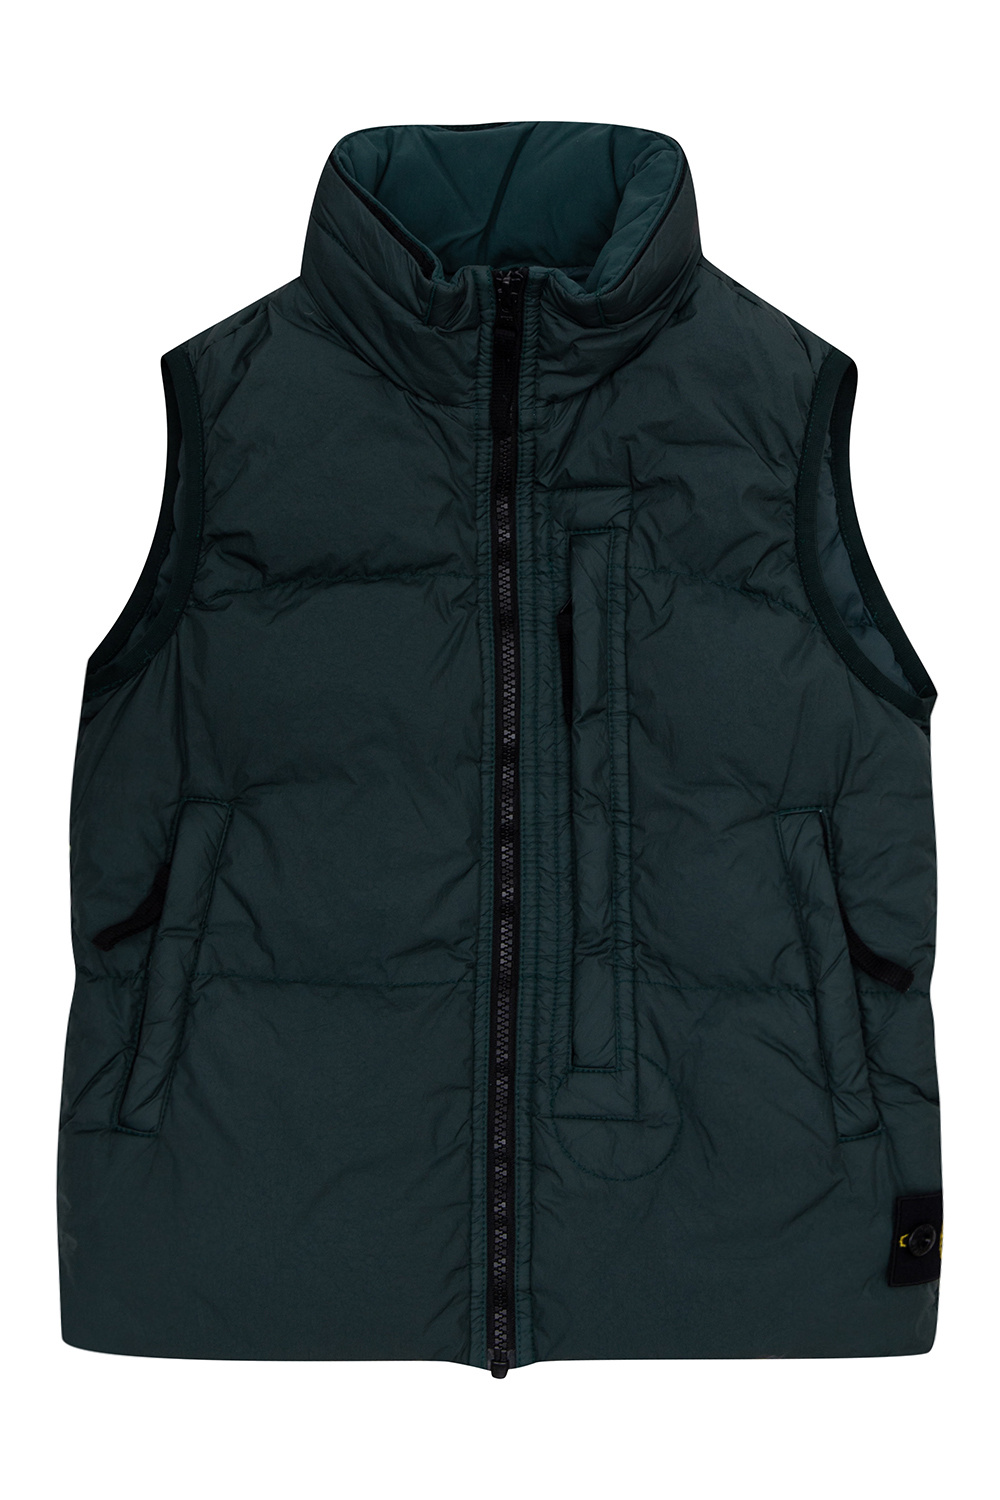 GIRLS CLOTHES 4-14 YEARS Vest with concealed hood